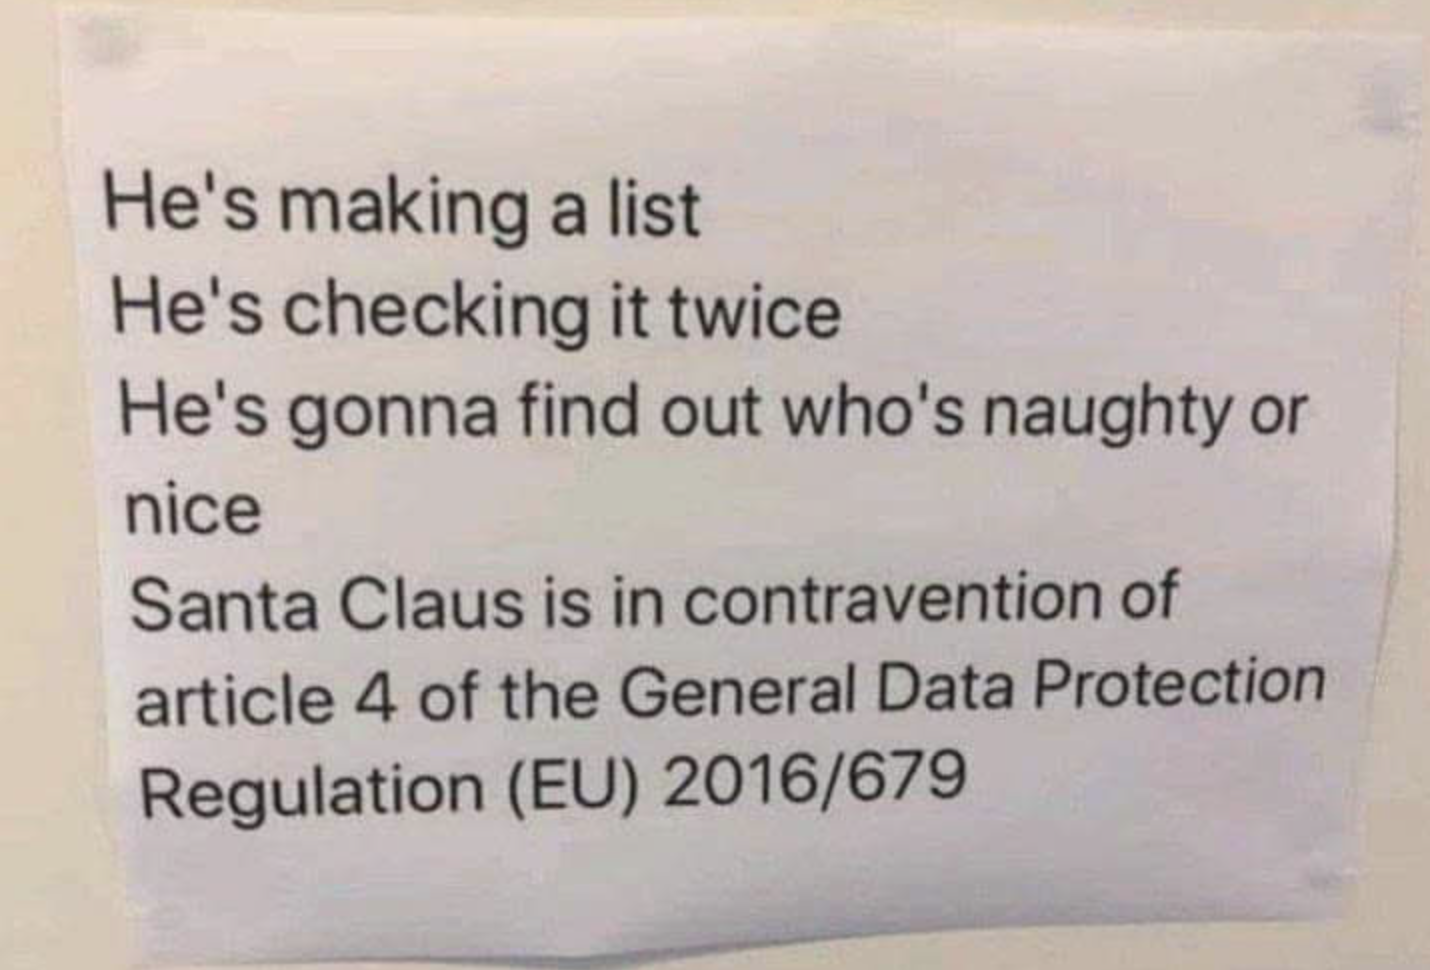 he's making a list and checking it twice gdpr - He's making a list He's checking it twice He's gonna find out who's naughty or nice Santa Claus is in contravention of article 4 of the General Data Protection Regulation Eu 2016679